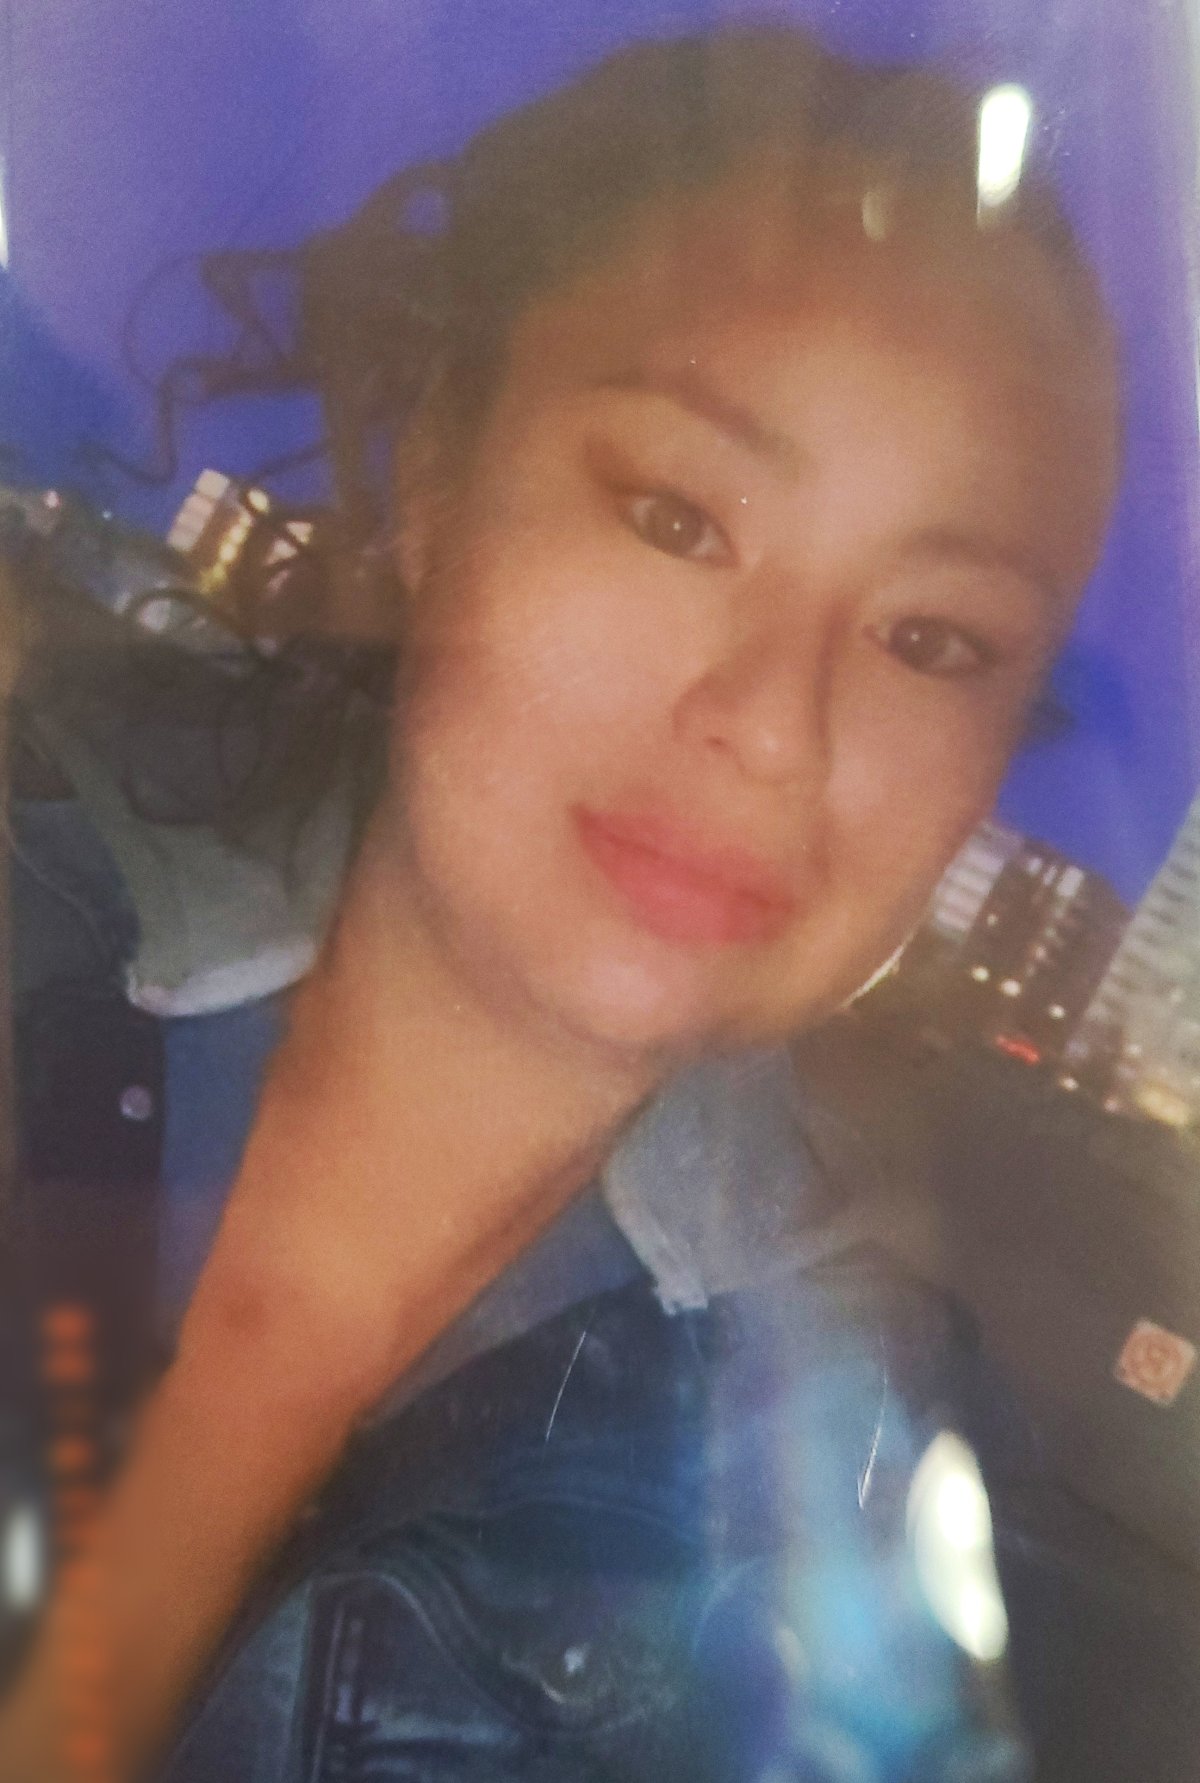 Onion Lake RCMP located the body of 32-year-old Courtnee Soosay, who was reported missing by RCMP last week.